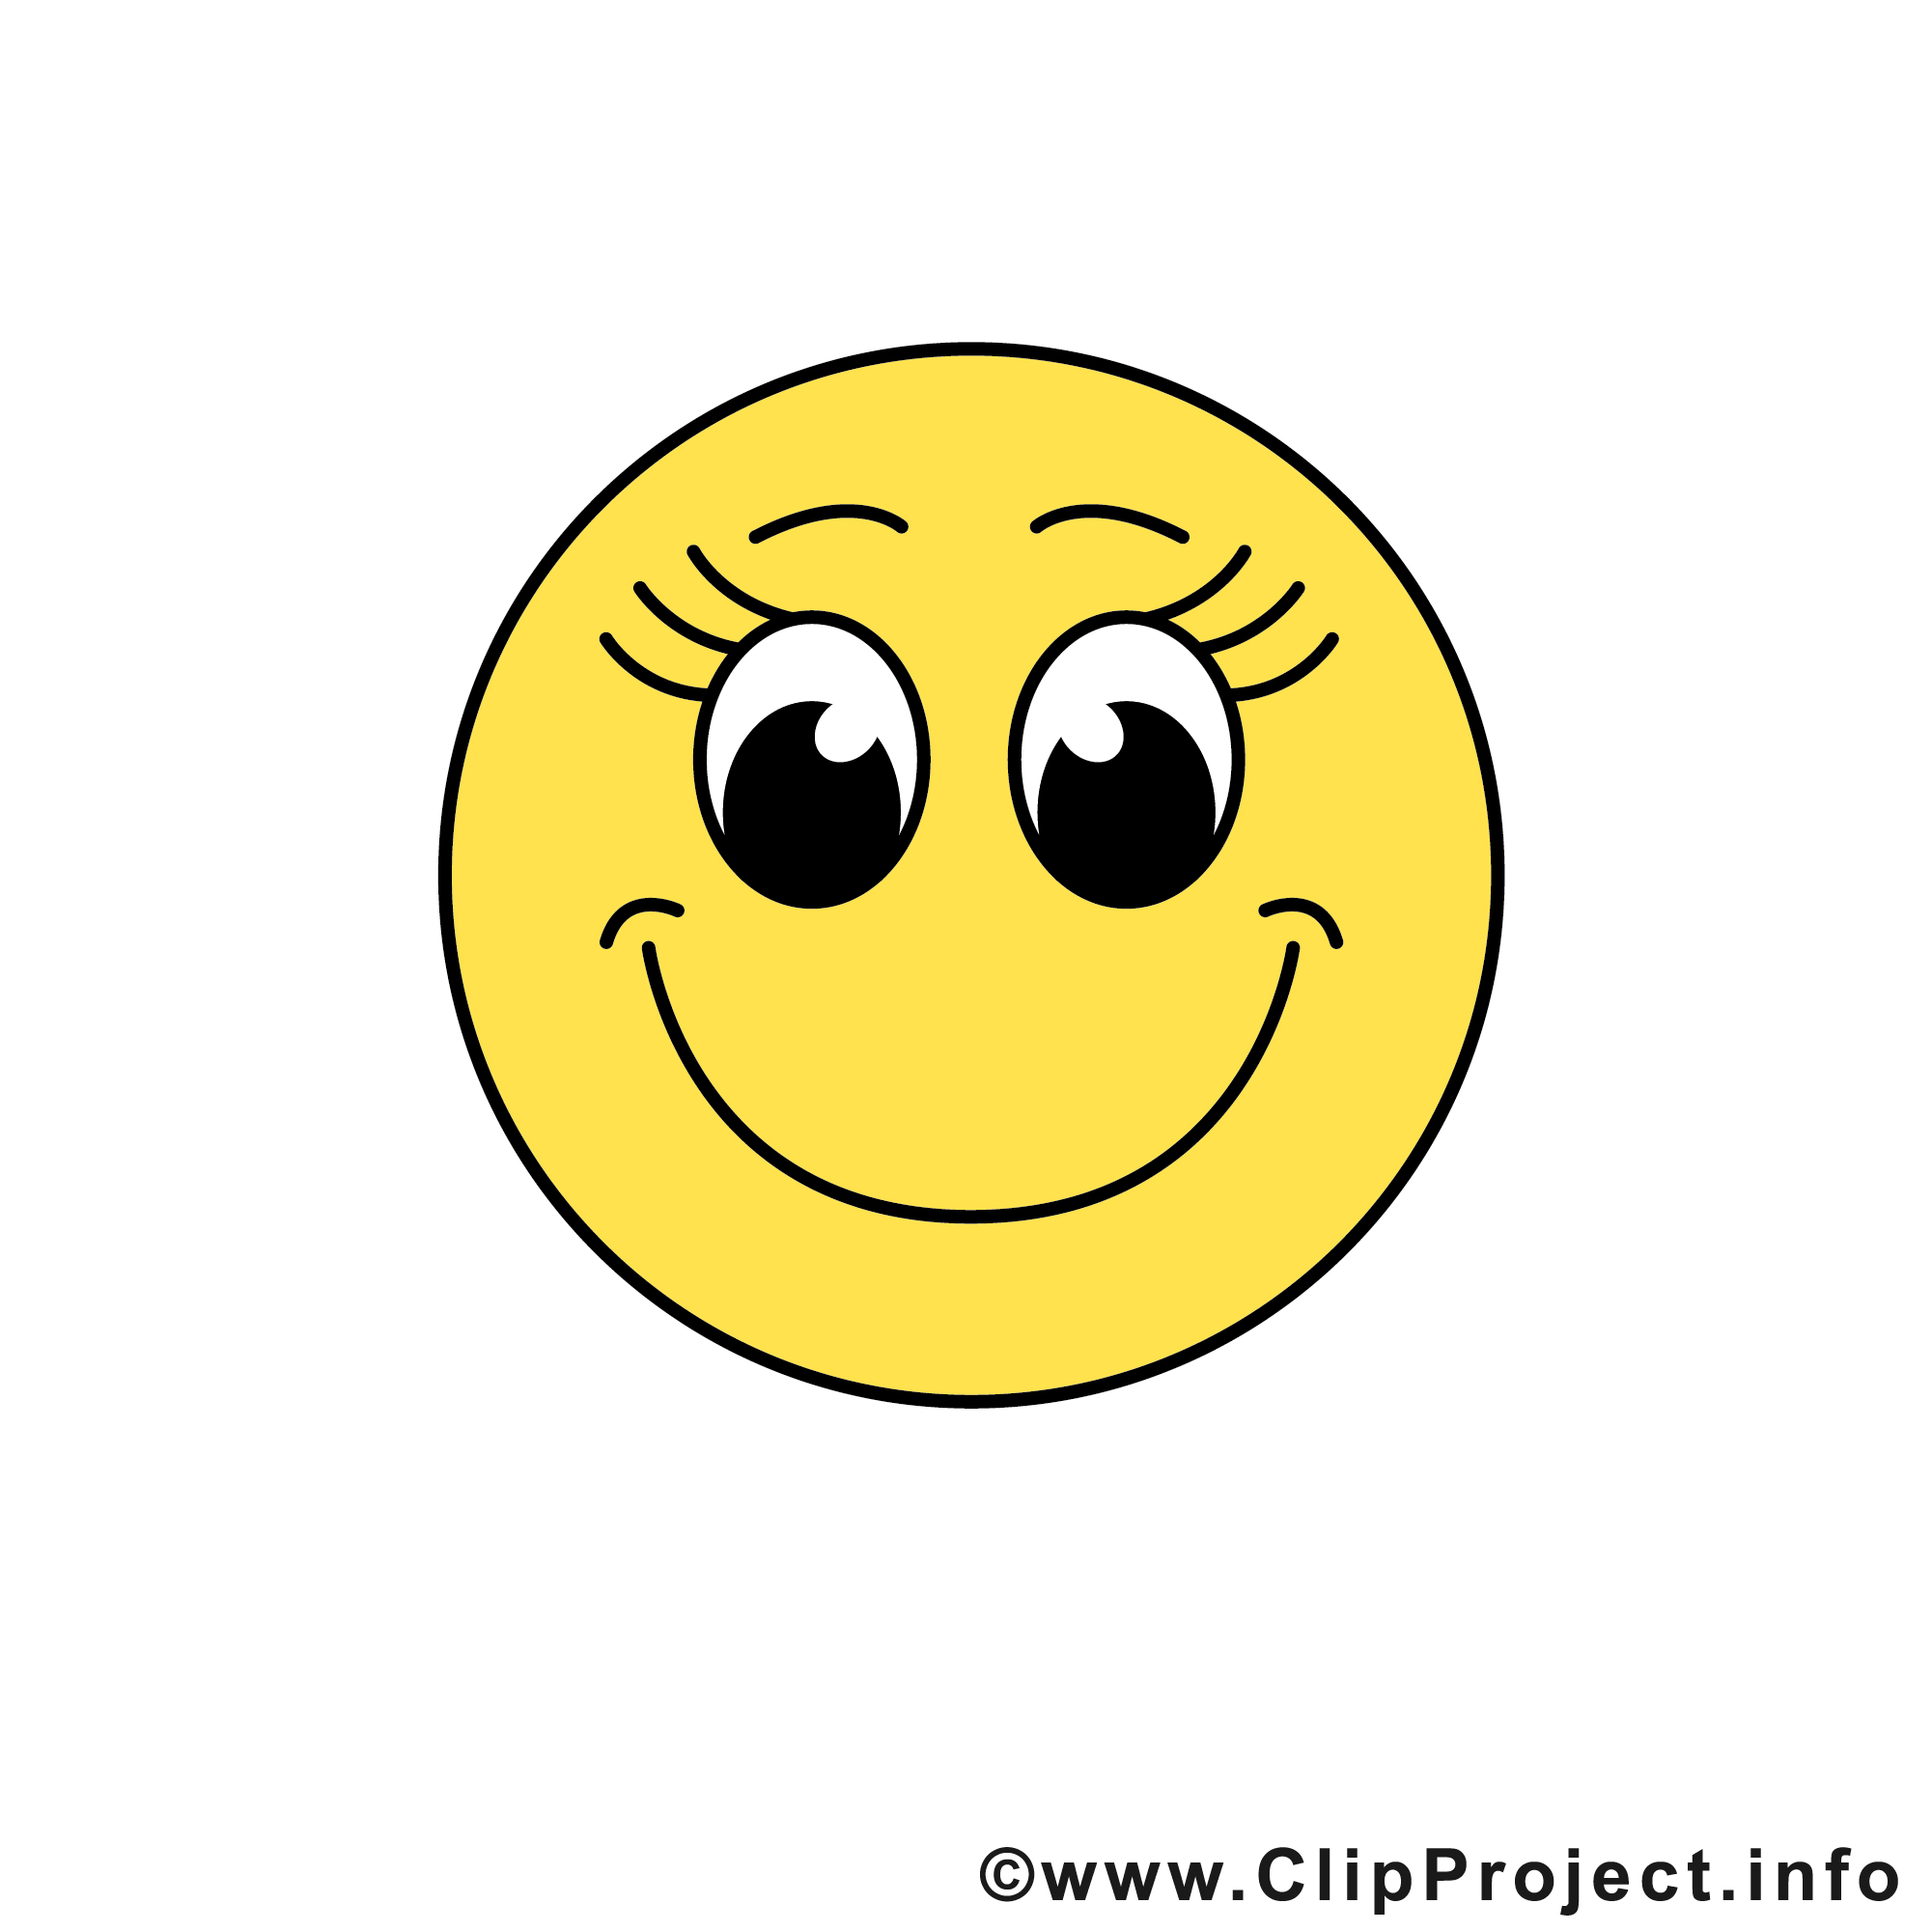 Free Smiley Emoticons Download - ClipArt Best